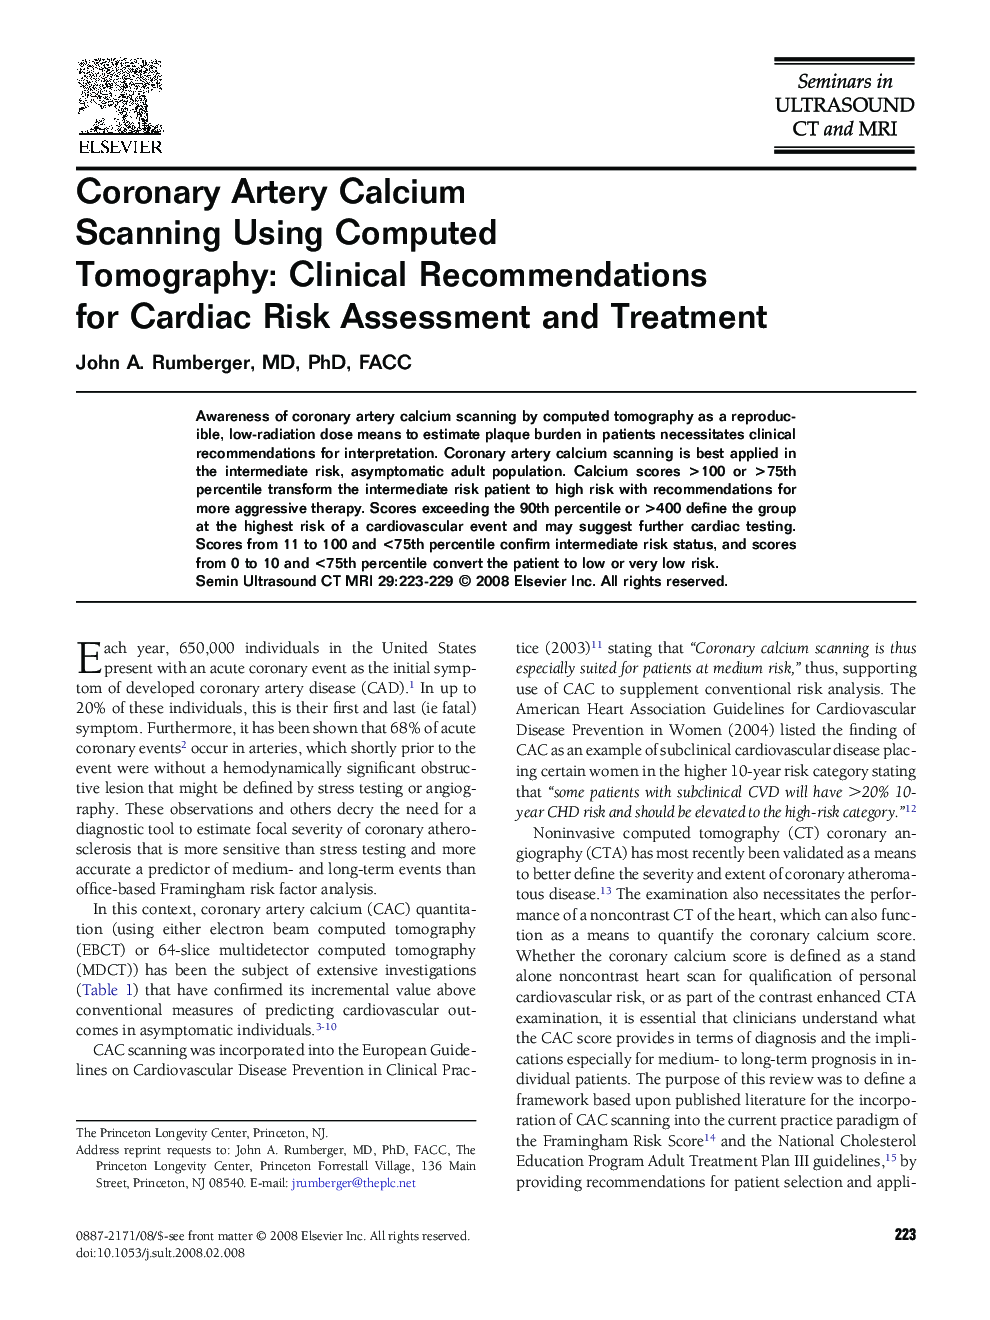 Coronary Artery Calcium Scanning Using Computed Tomography: Clinical Recommendations for Cardiac Risk Assessment and Treatment